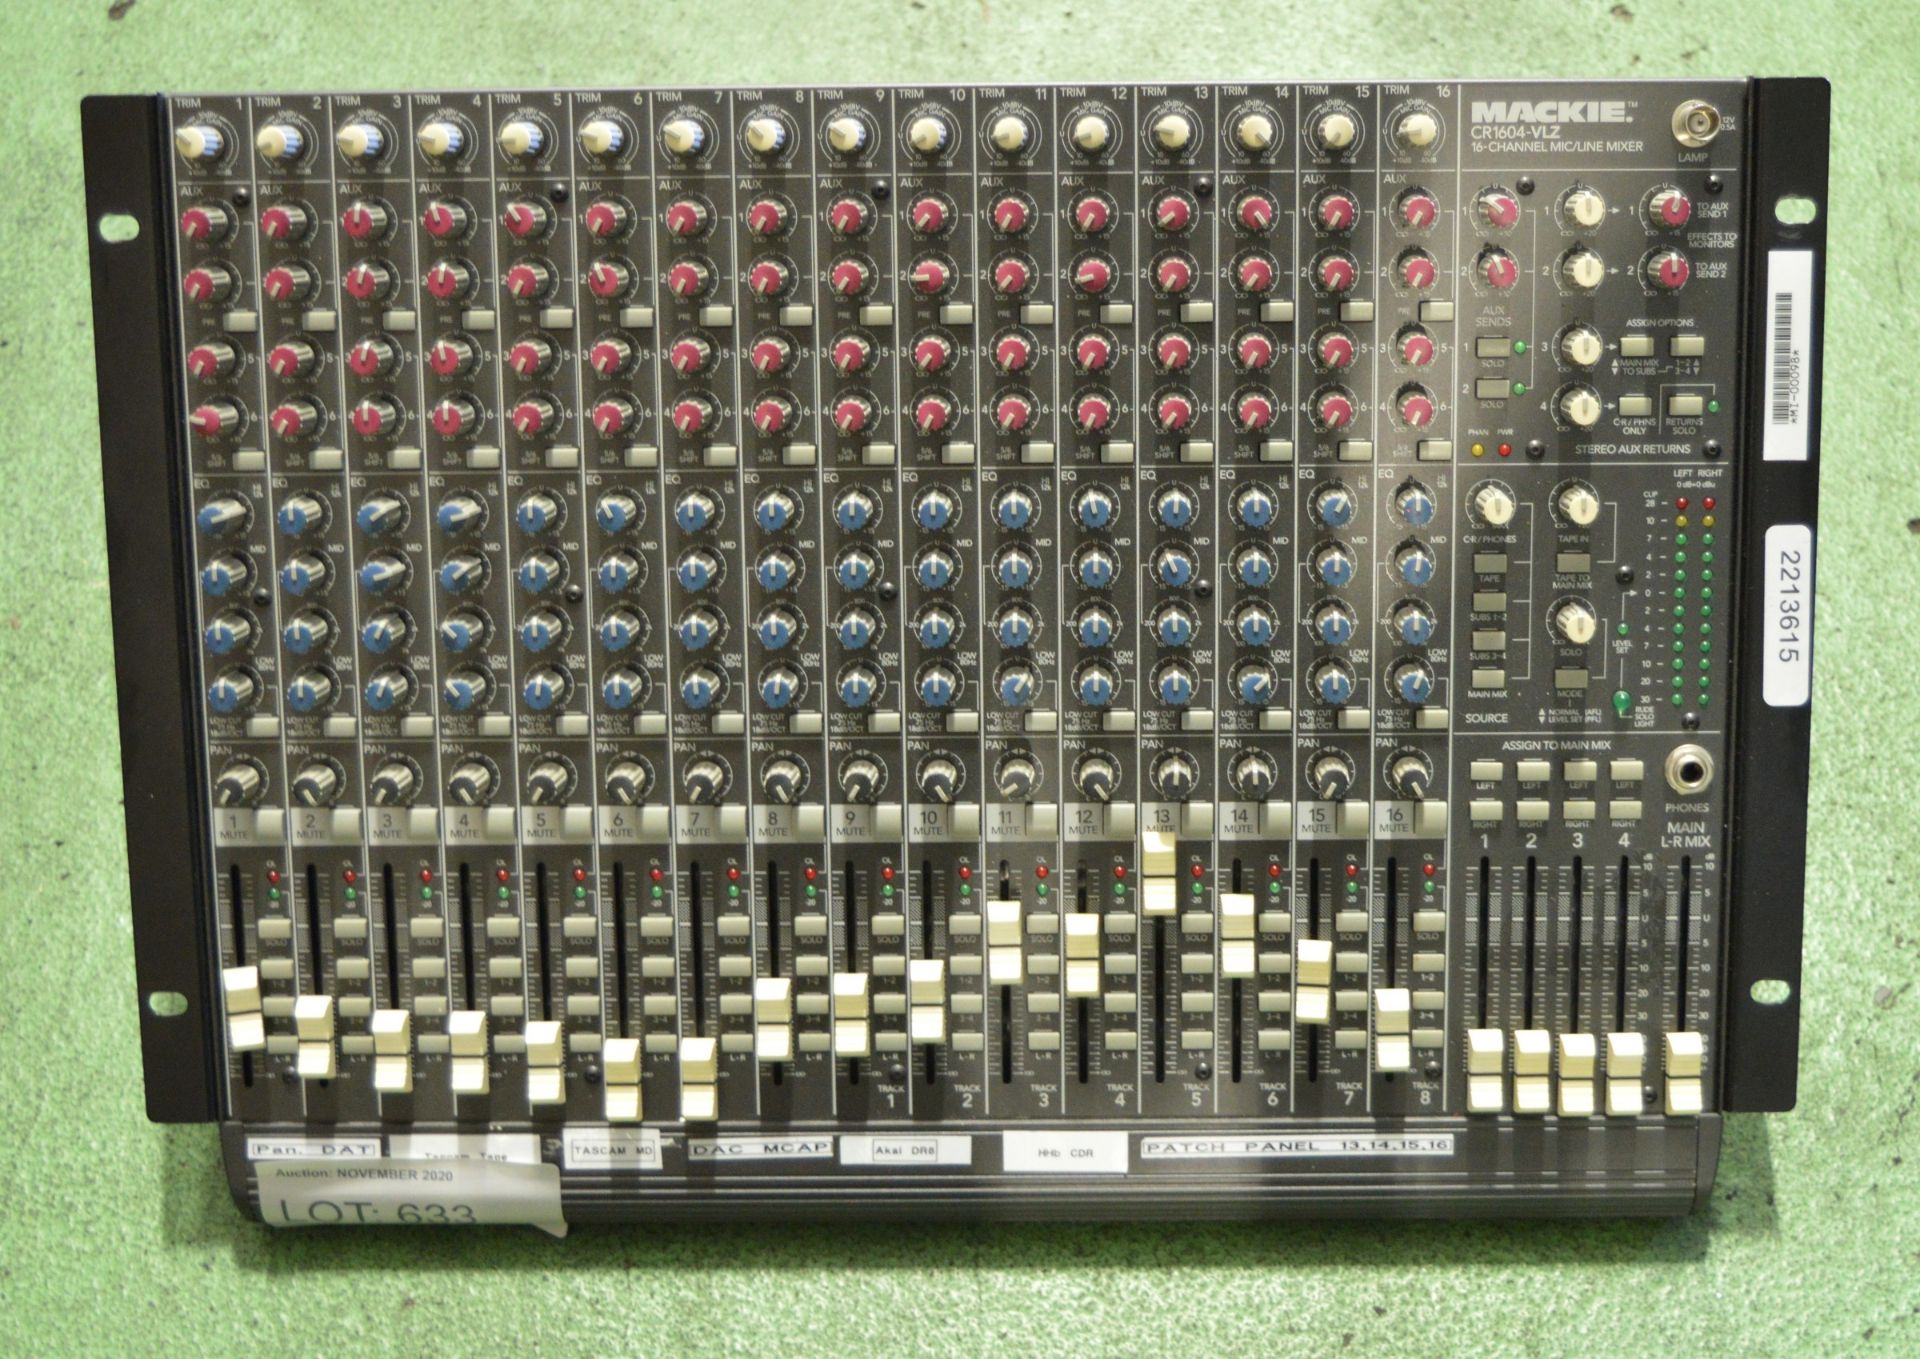 Mackie CR1604-VLZ 16 Channel Mixing Desk - Image 2 of 2